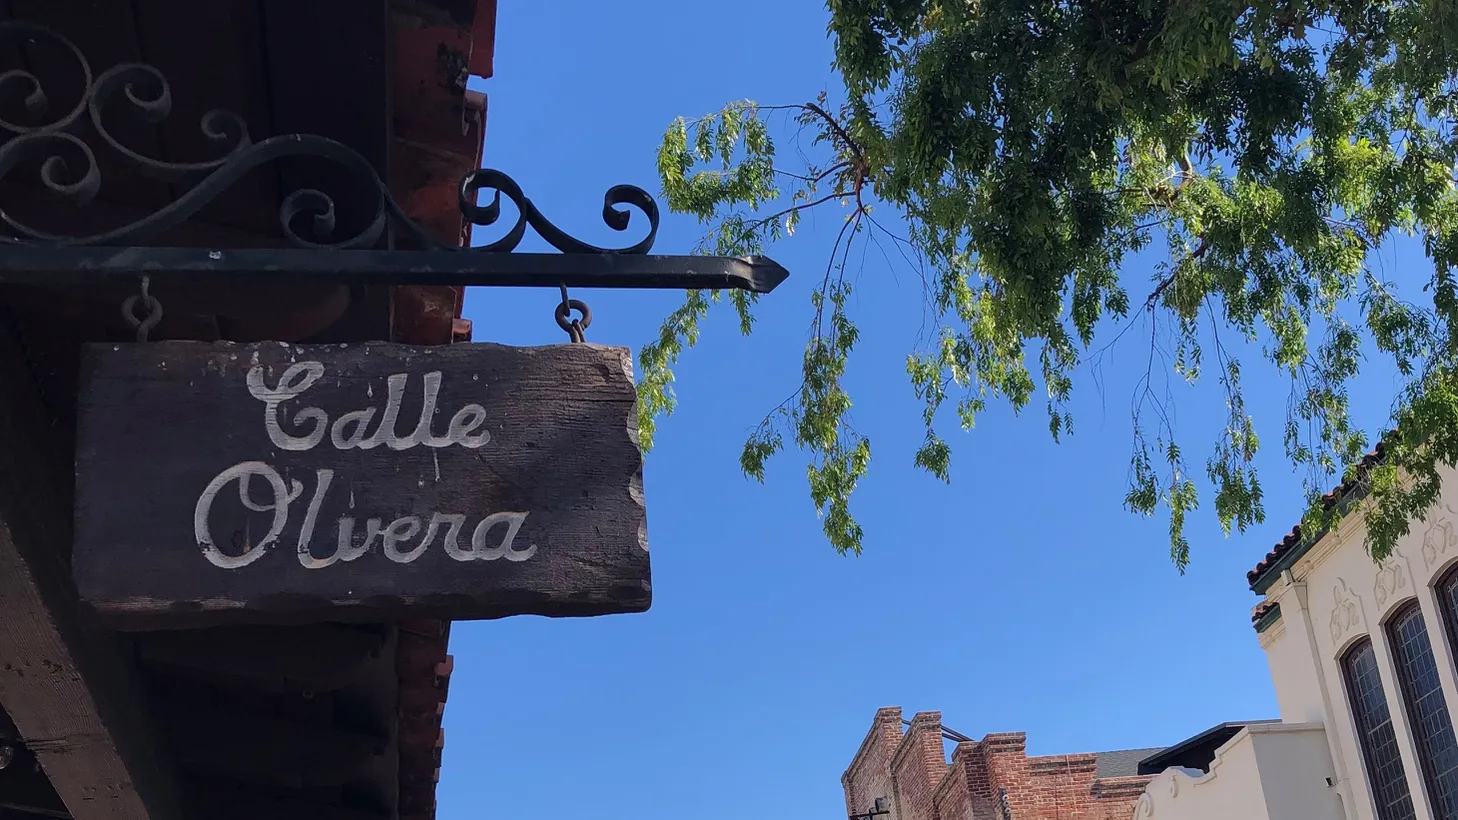 “A Spanish American social and commercial center … would furnish Los Angeles with the greatest tourist attraction she may ever have,” Christine Sterling (aka the “Mother of Olvera Street”) wrote in a 1926 journal entry.